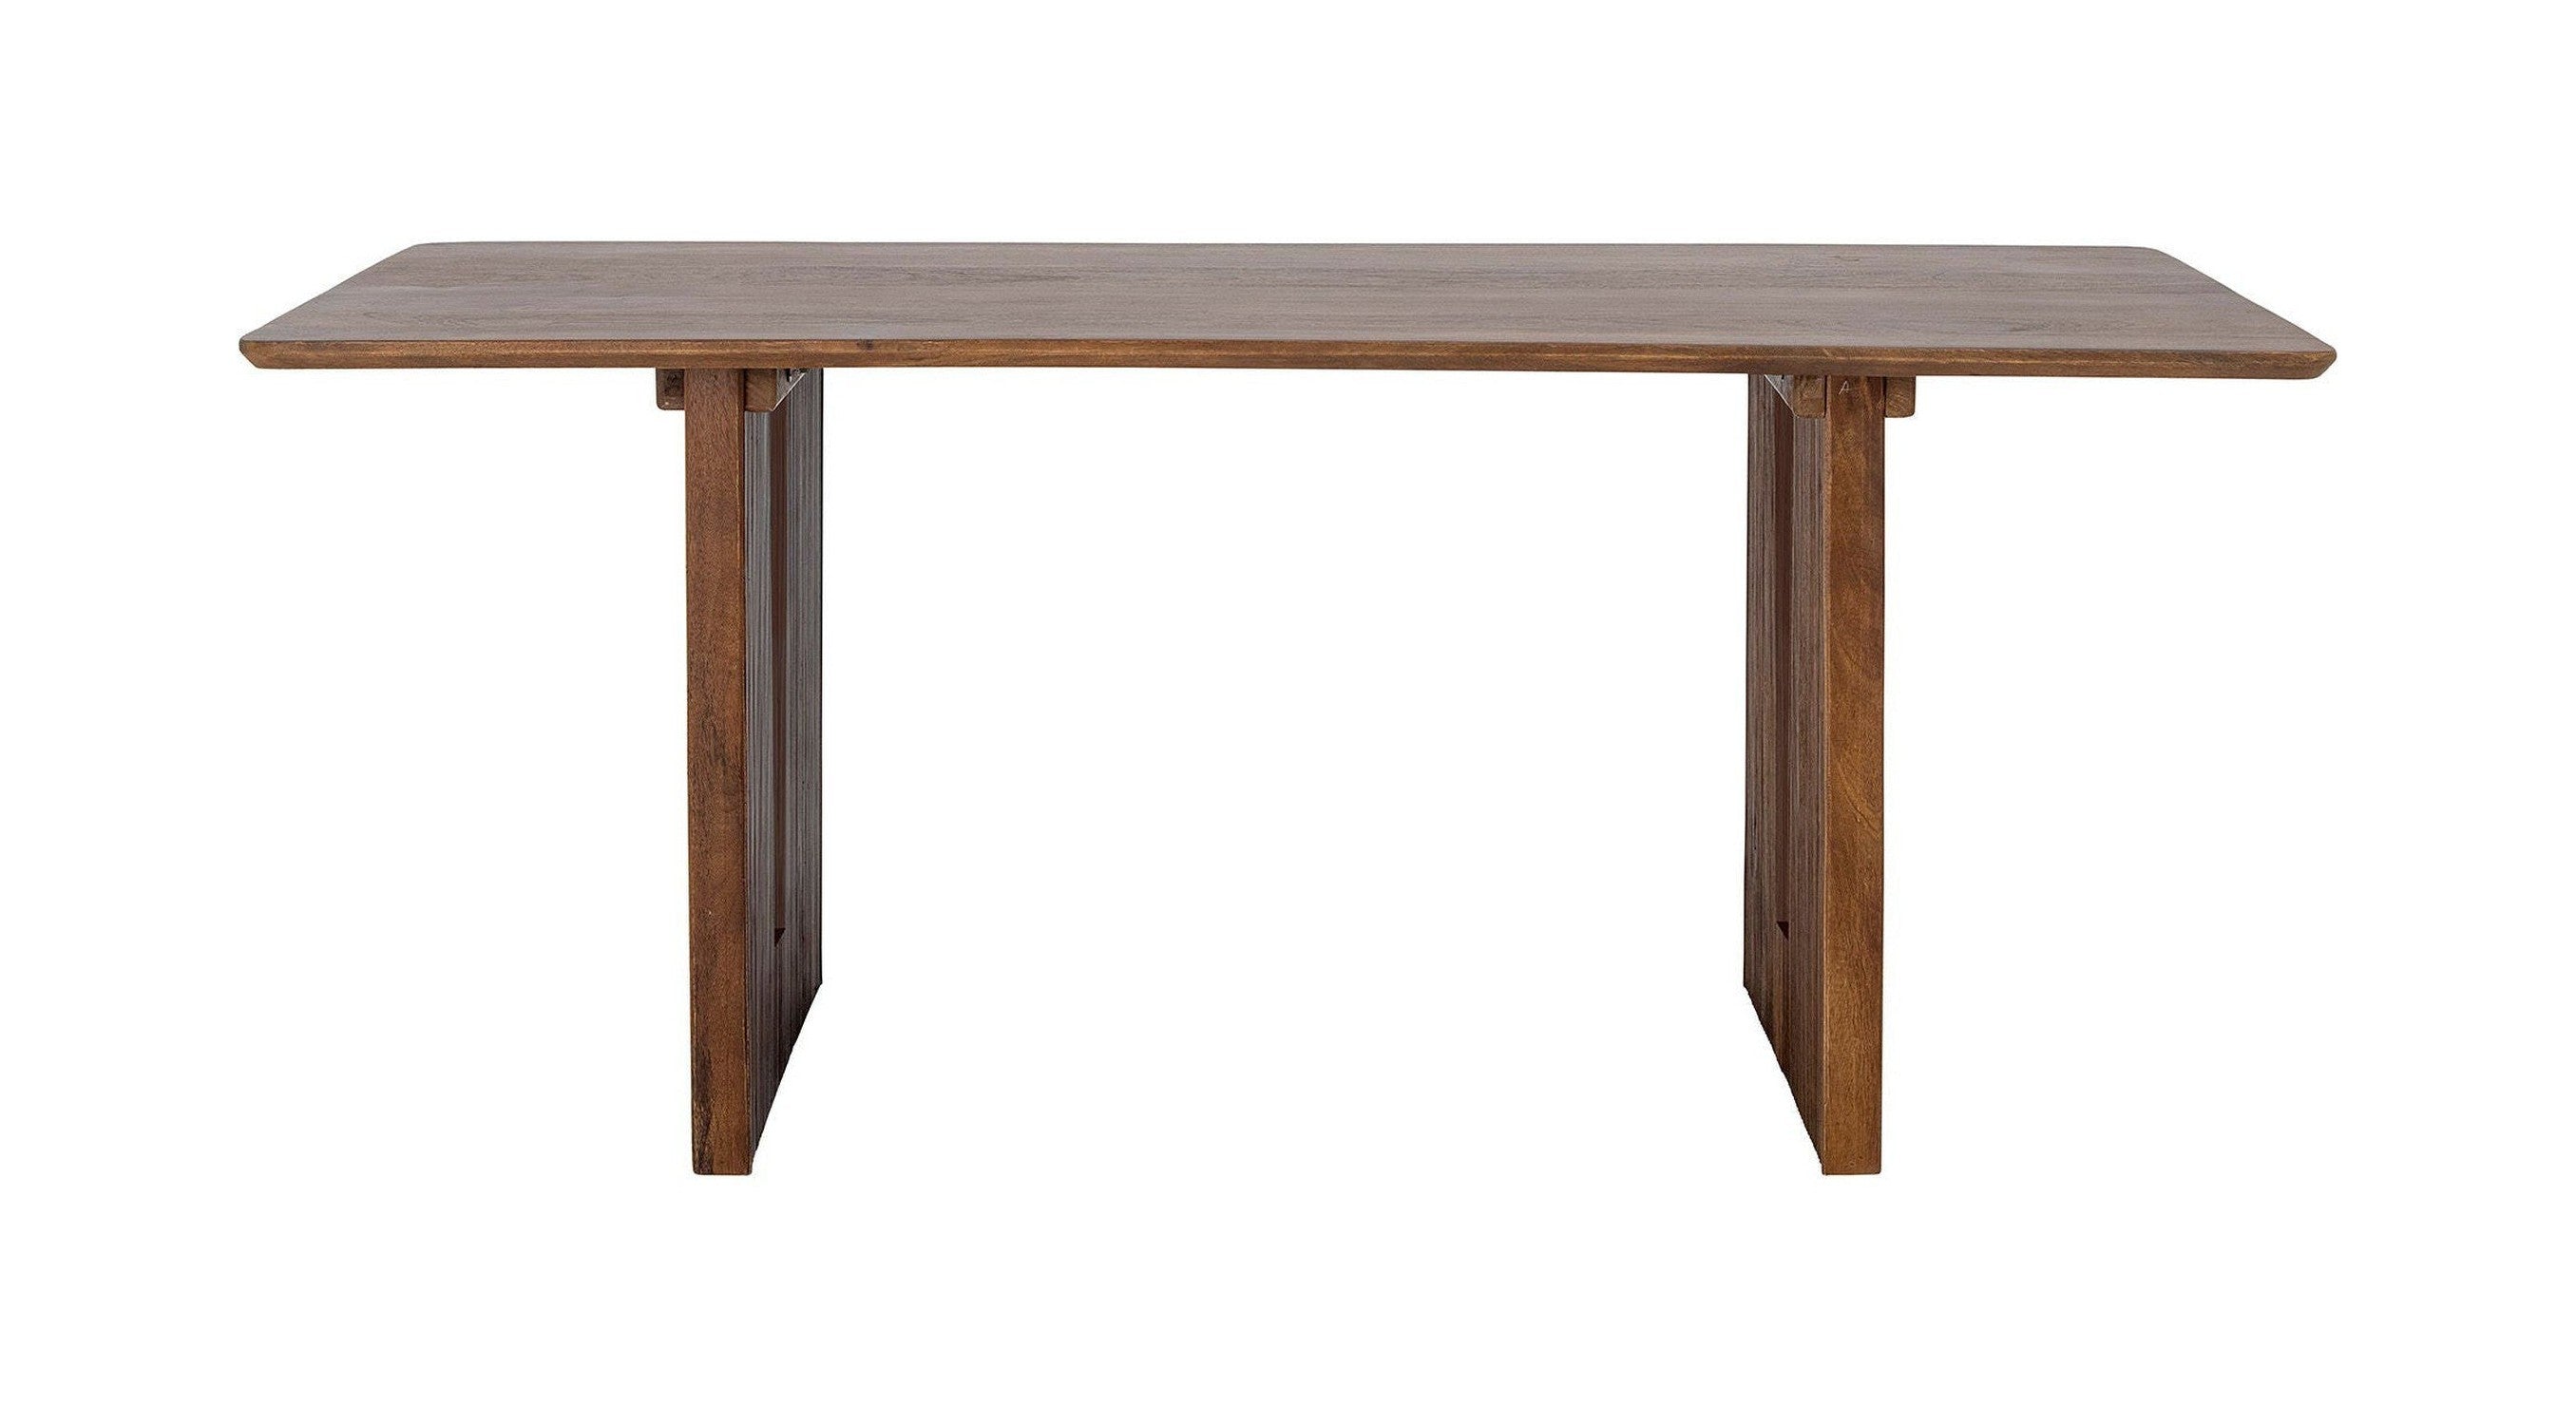 Creative Collection Milow Dining Table, Brown, Mango